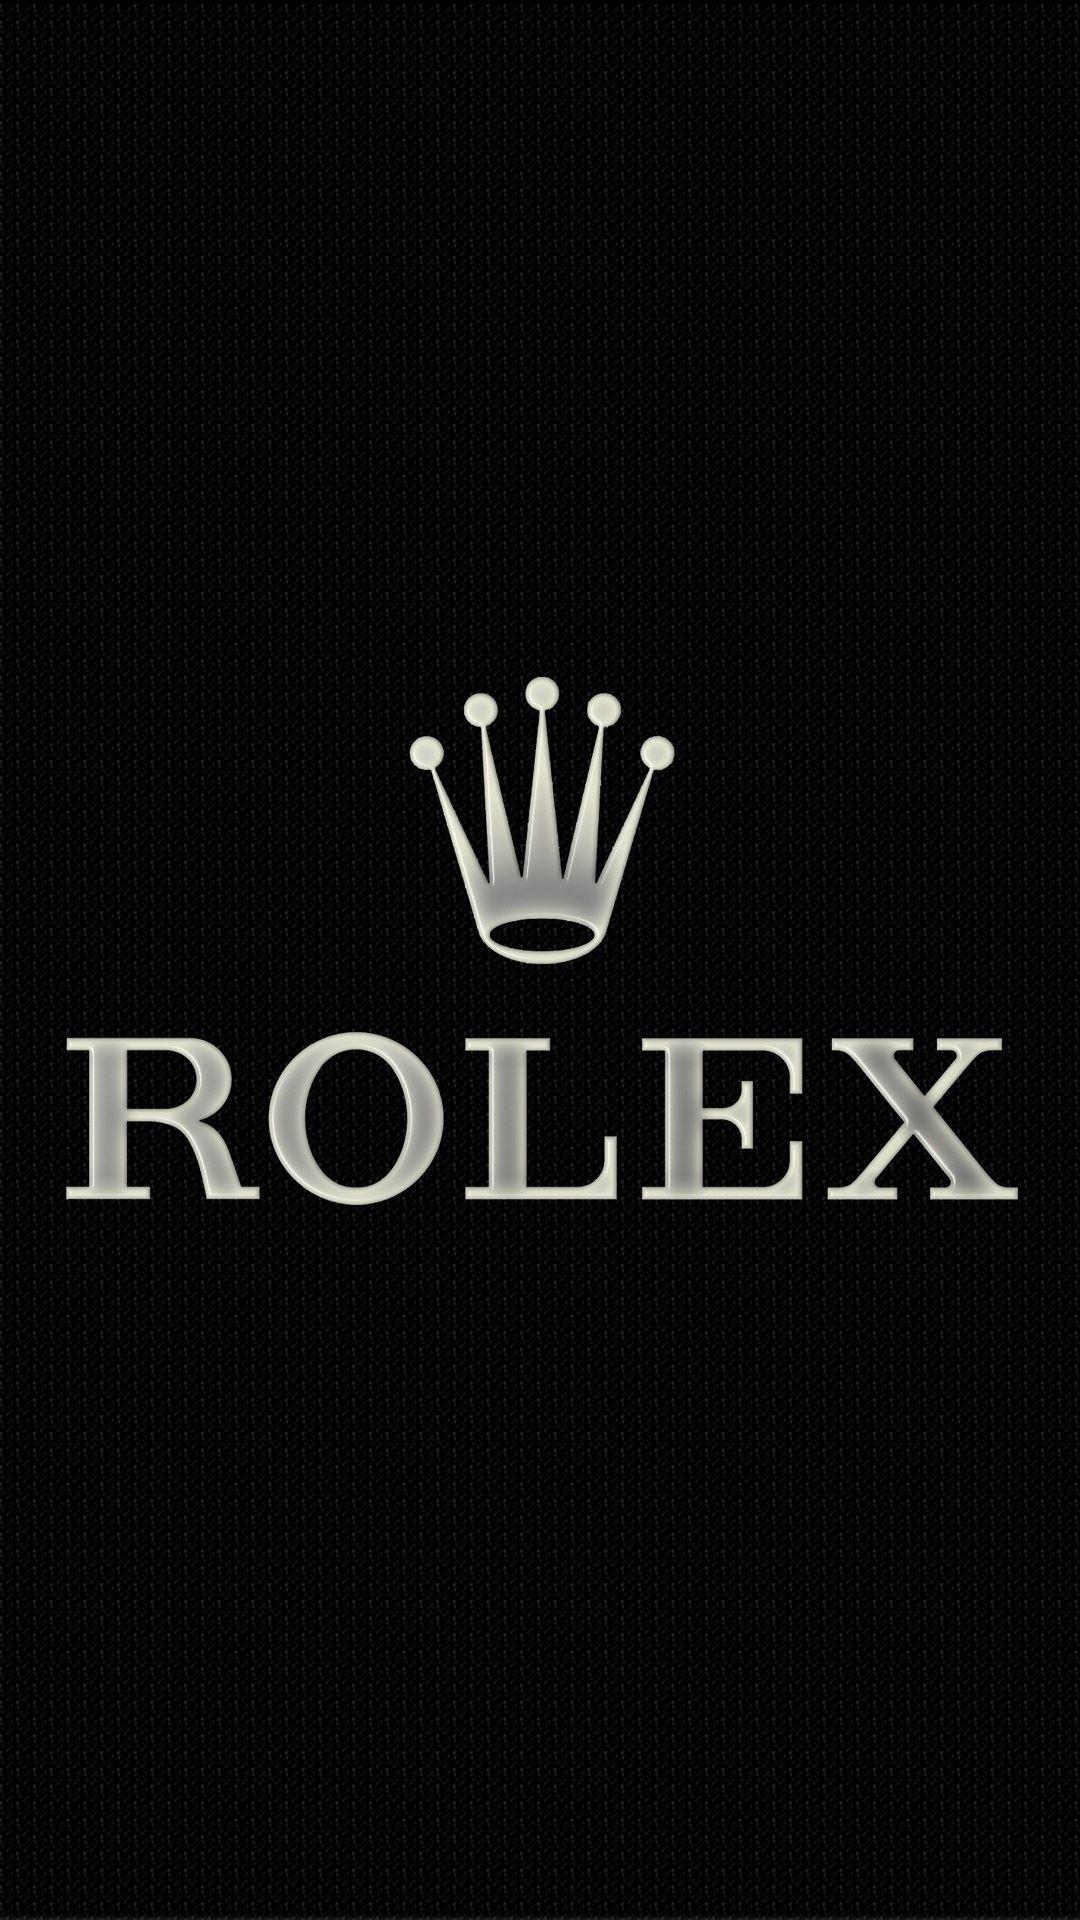 Rolex Logo Black And White Android Wallpaper free download